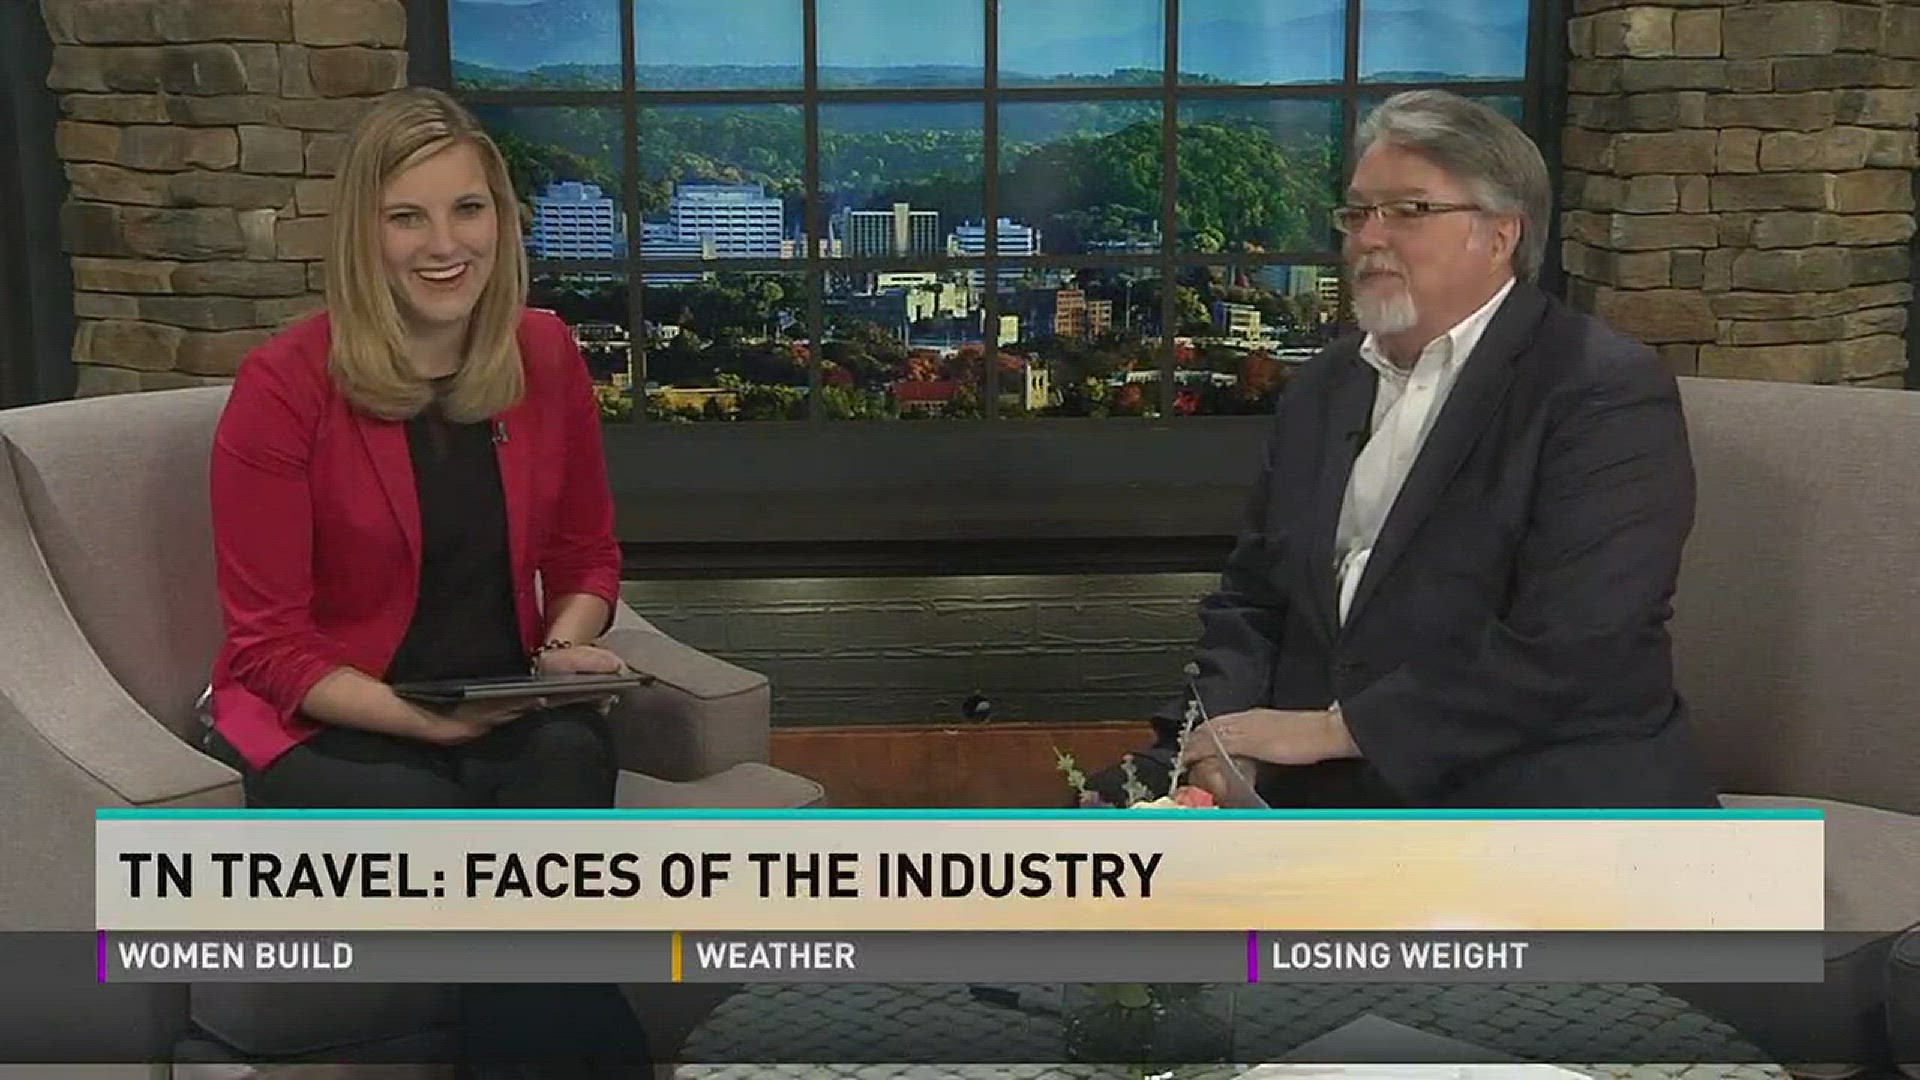 Dave Jones stops by to talk about the faces of the tourism industry.